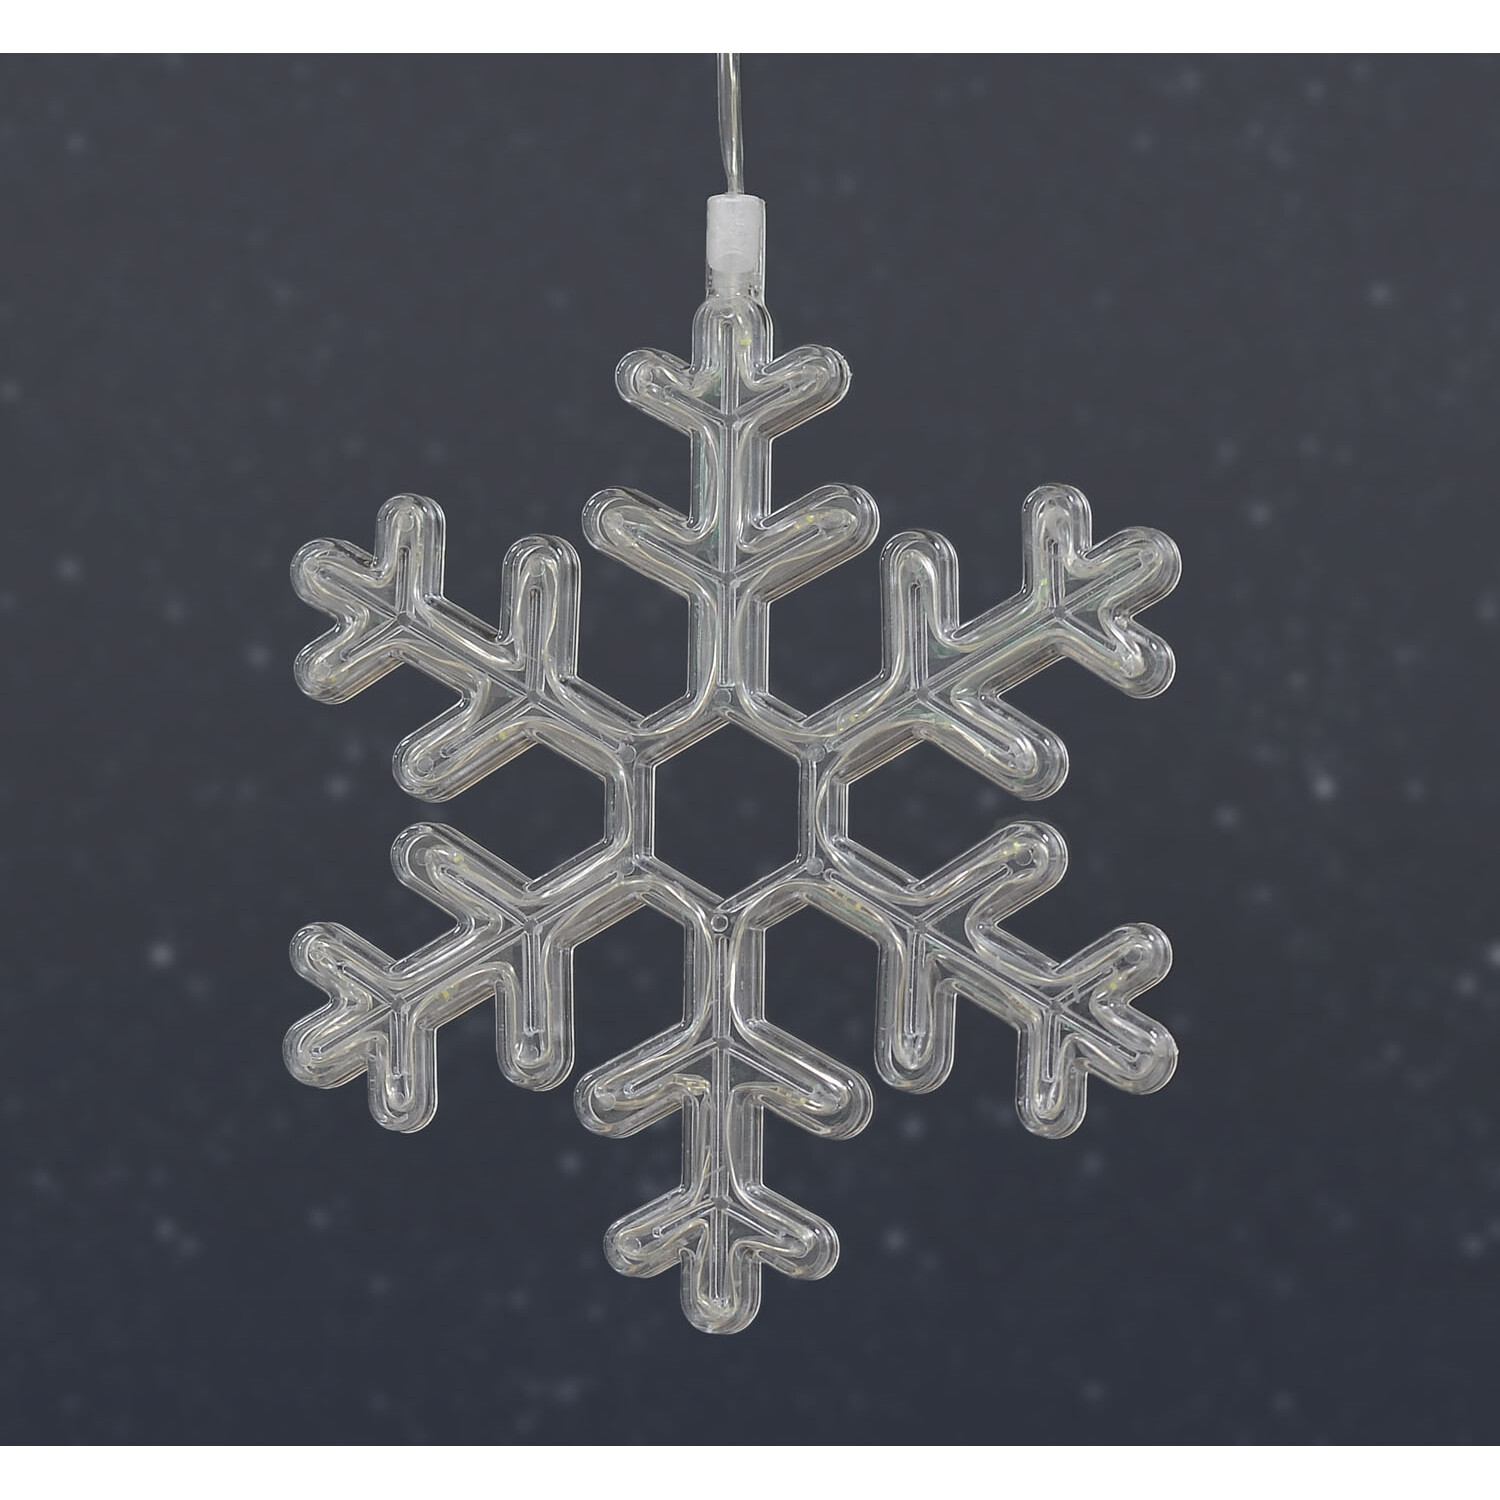 124 LED Snowflake Curtain Light - Clear Image 4